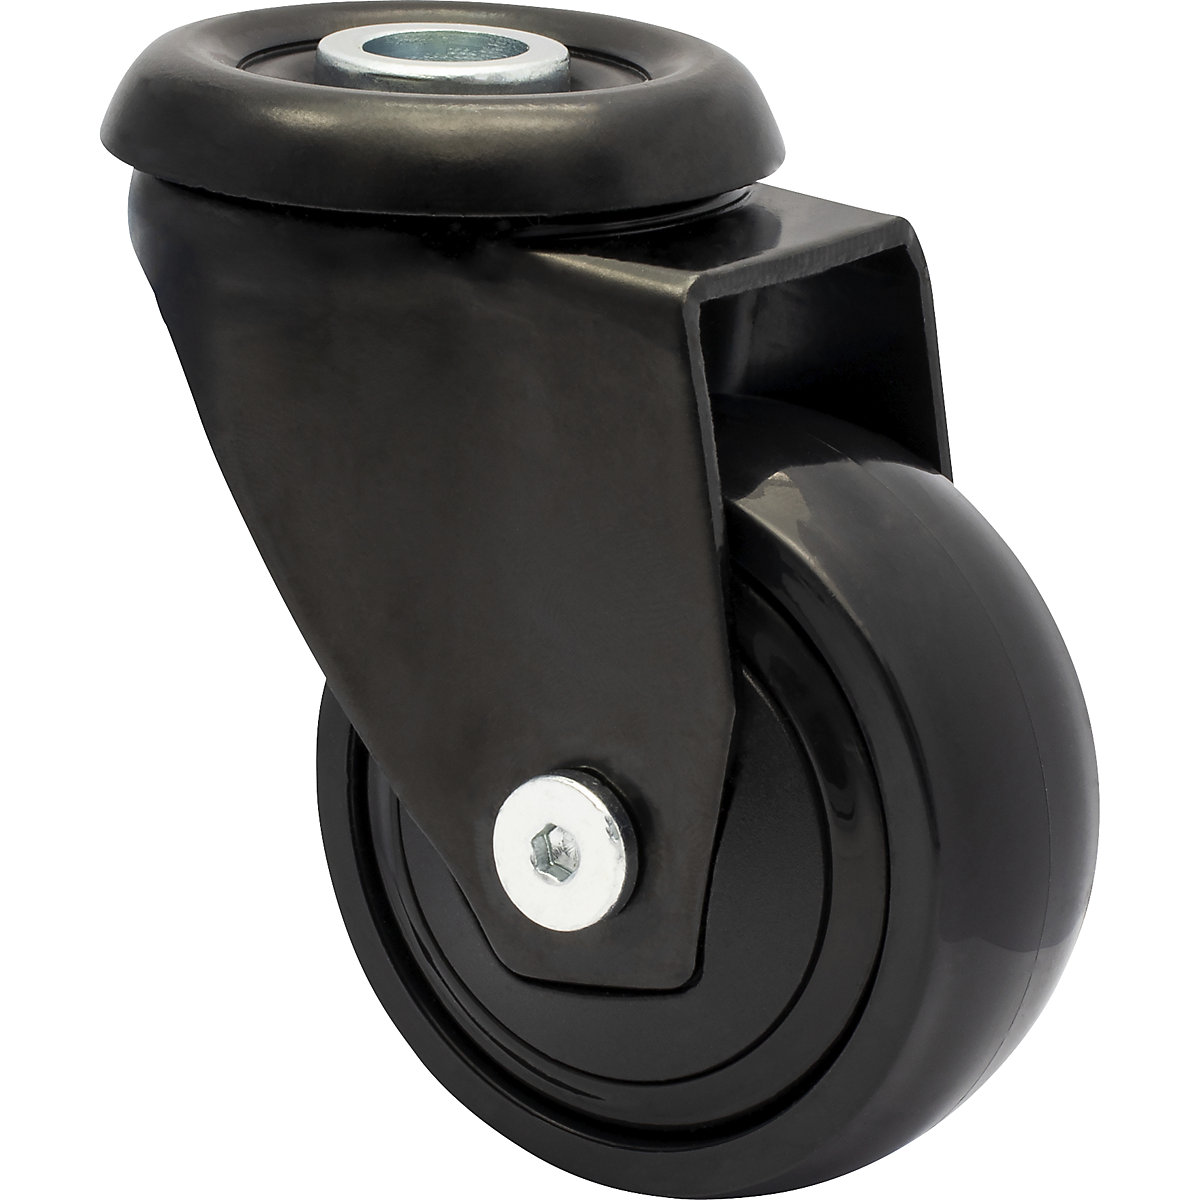 3C series swivel castor with back hole for furniture - Wagner